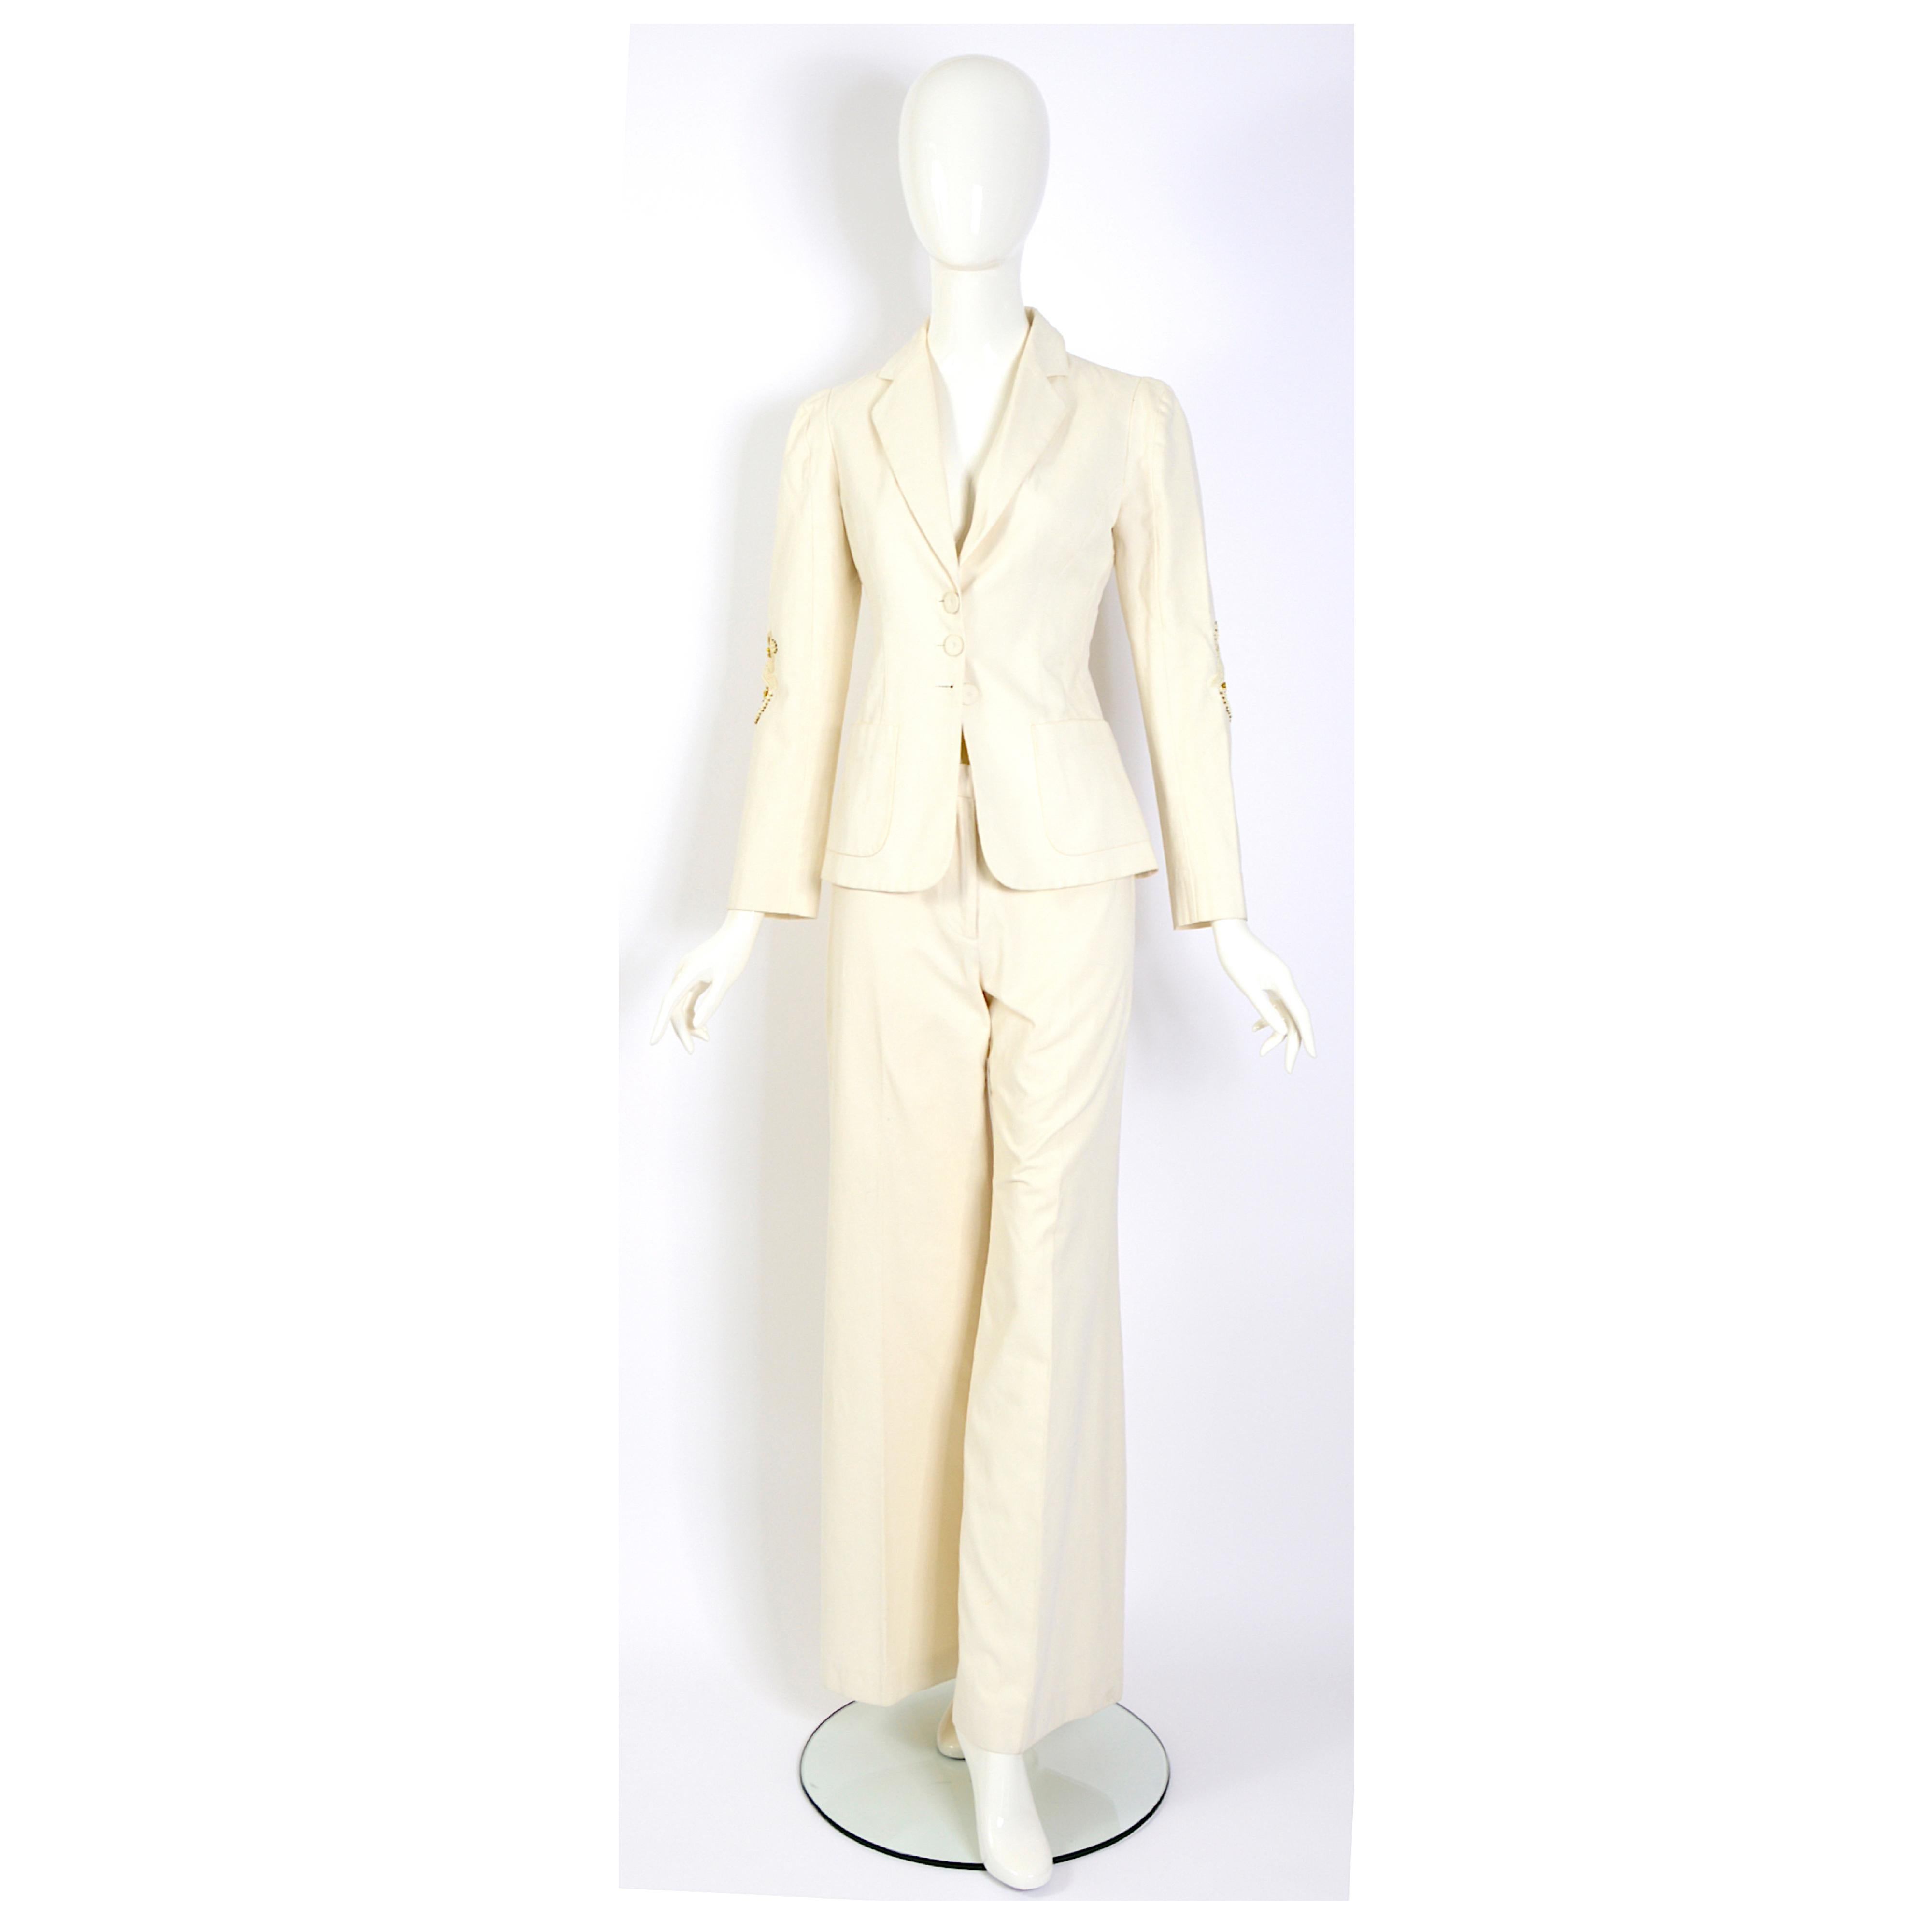 Chloé by Phoebe Philo vintage S/S 2002 embellished back and sleeves cream suit In Good Condition For Sale In Antwerp, BE